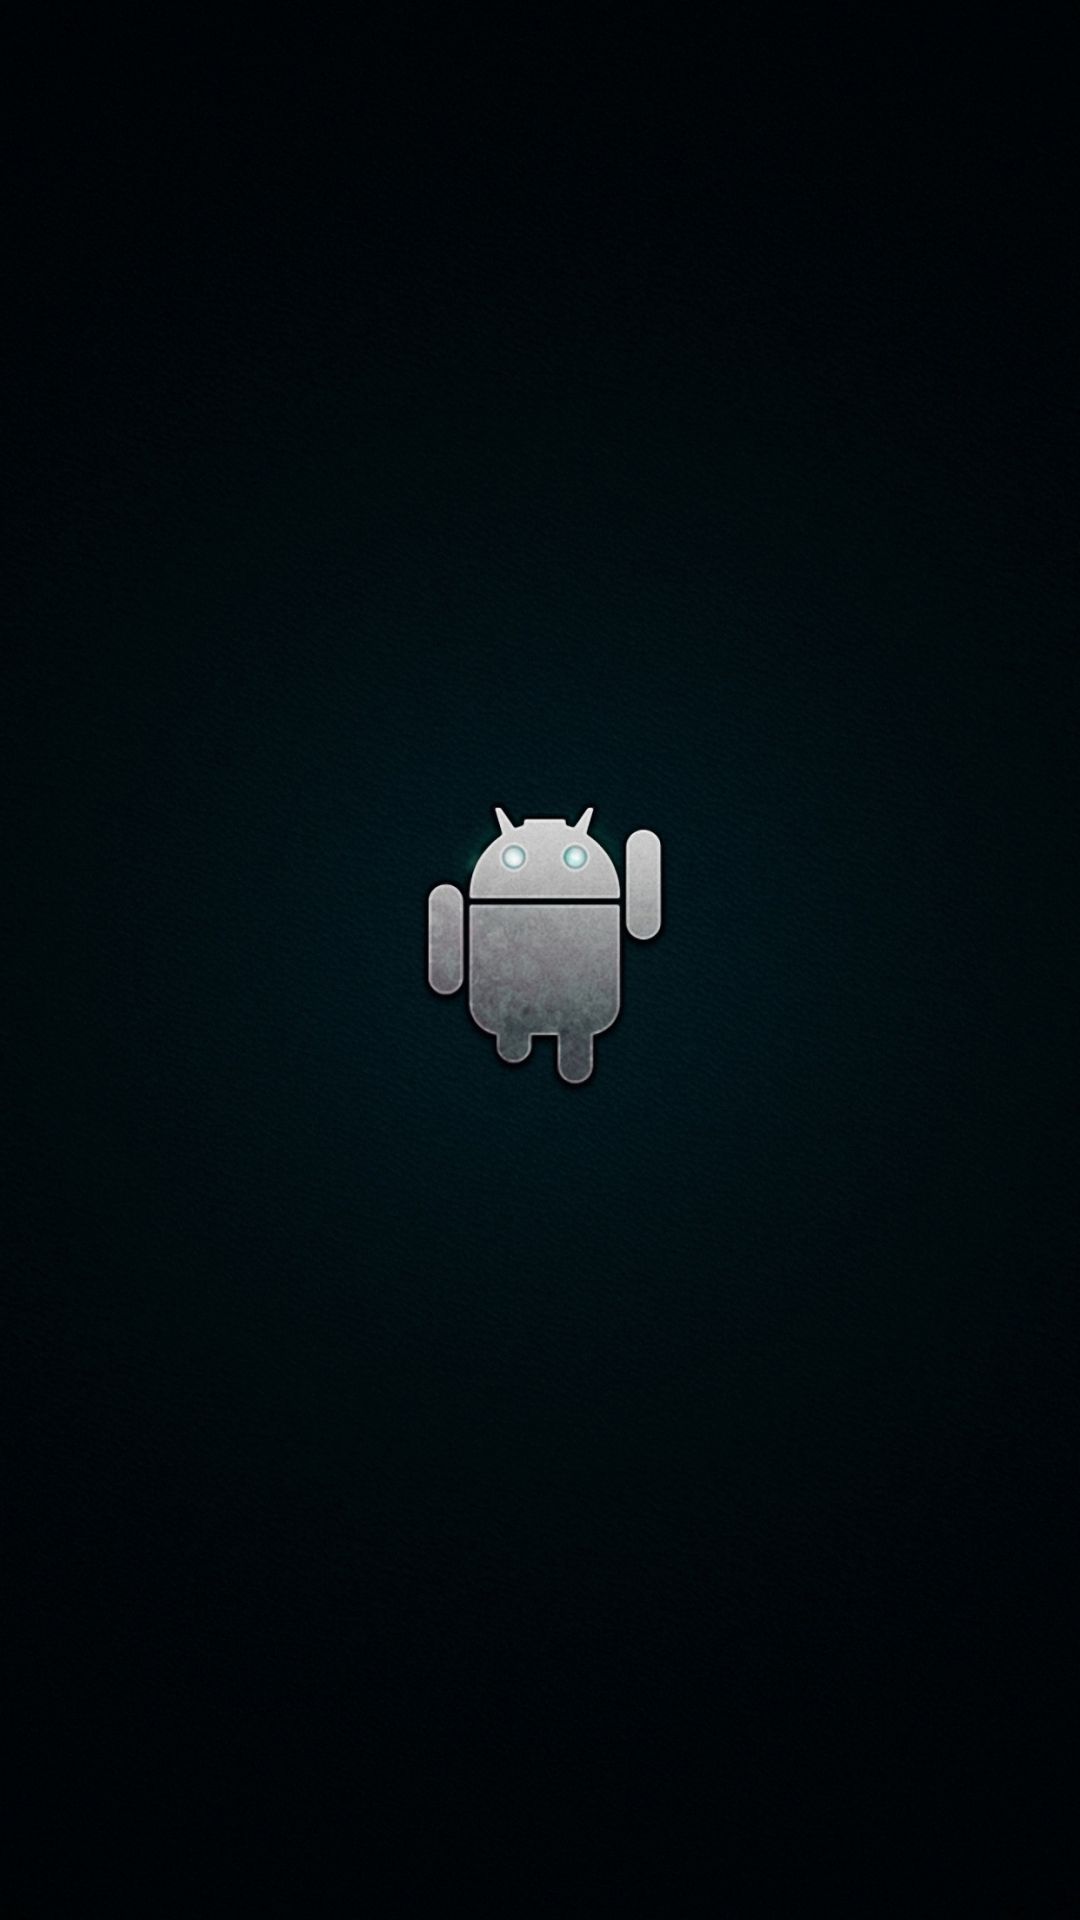 Simple Android Wallpapers 4k Hd Simple Android Backgrounds On Wallpaperbat